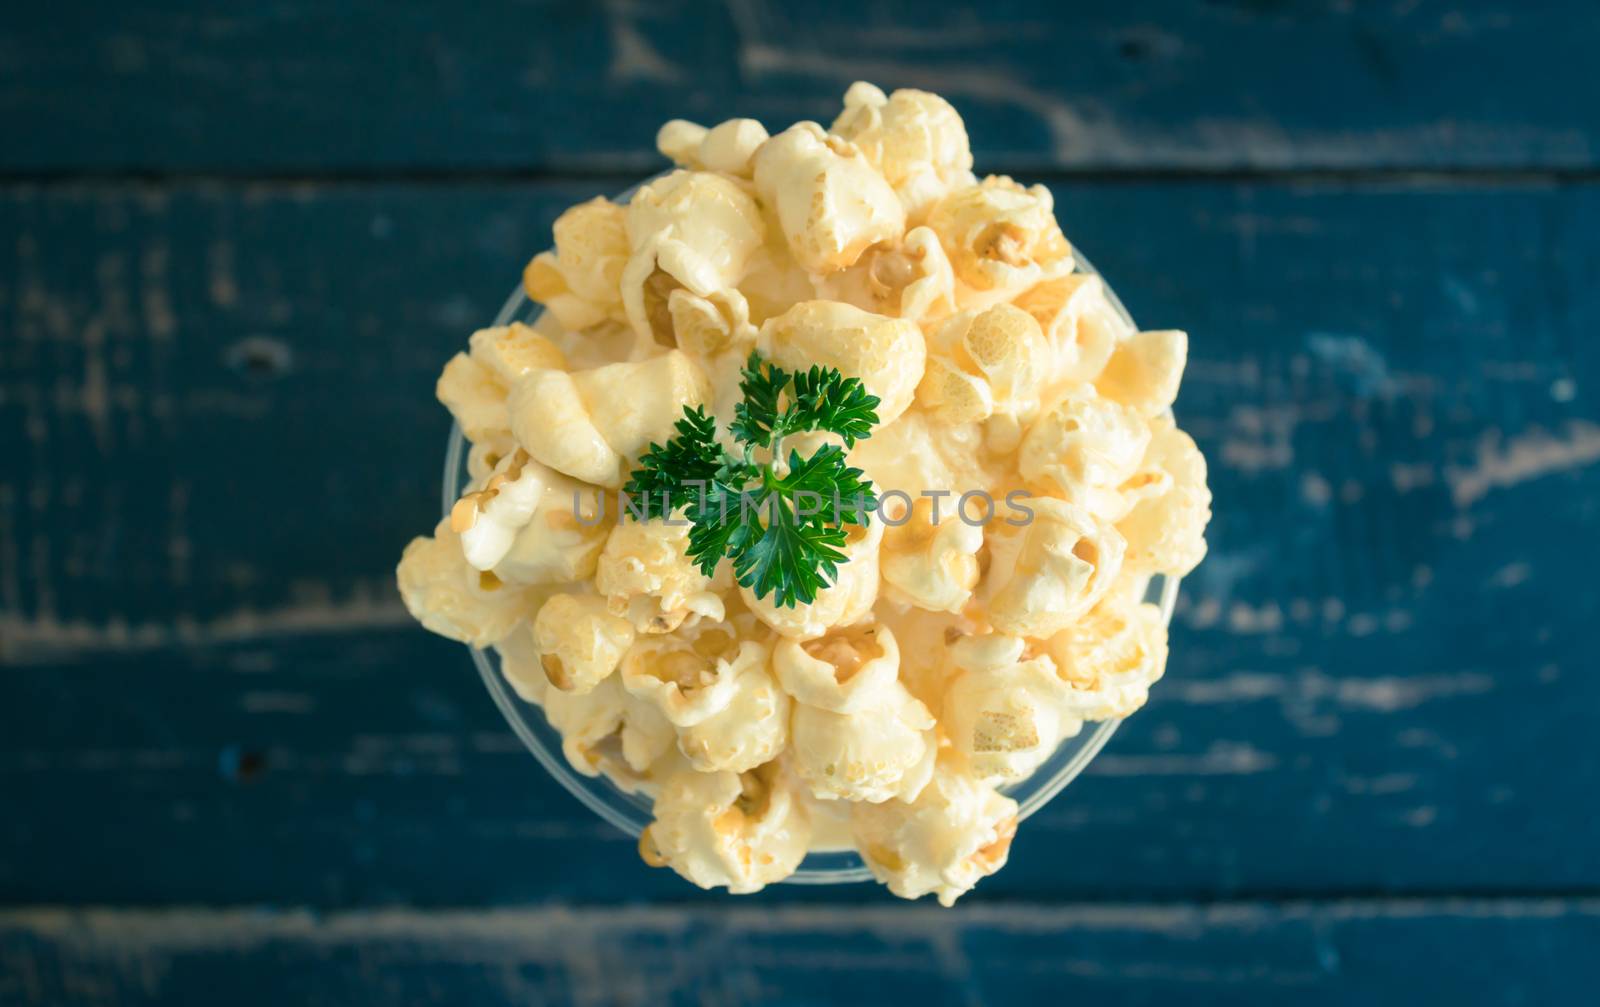 Sweet Caramel Popcorn and Whipped Cream and Fresh Milk with Parsley. Cold Beverage caramel popcorn and whipped cream and fresh milk. Caramel popcorn and whipped cream and fresh milk for food and drink category